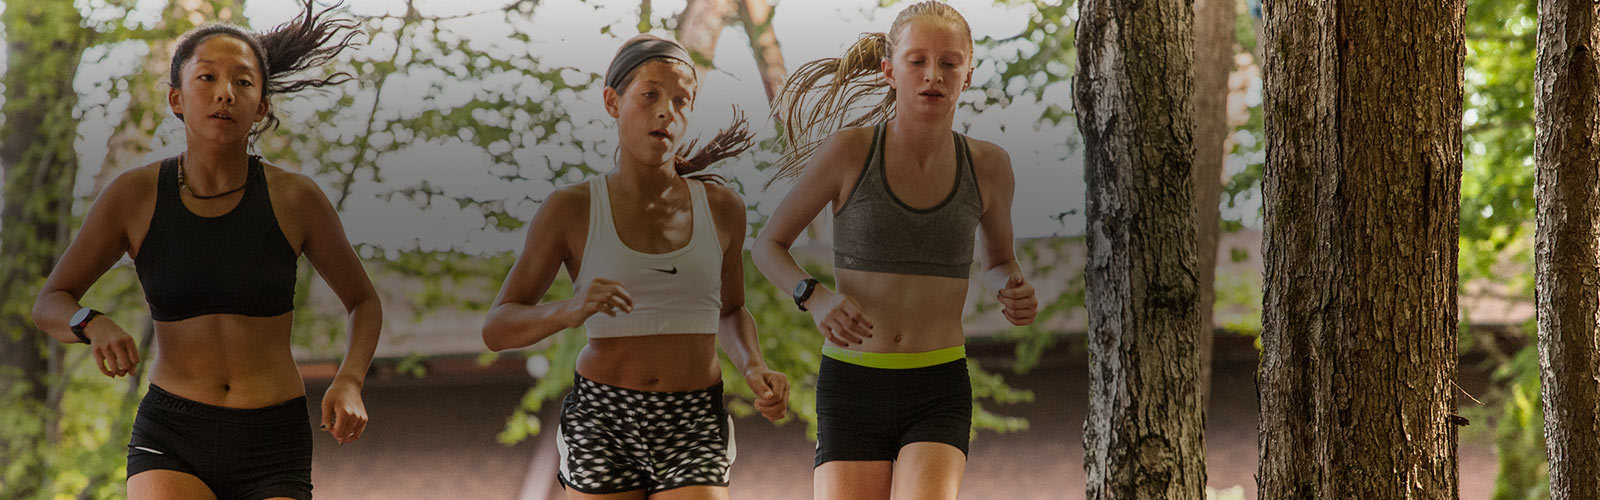 Nike Cross Country Running Camps Five Star XC Camp 5star XC Camp